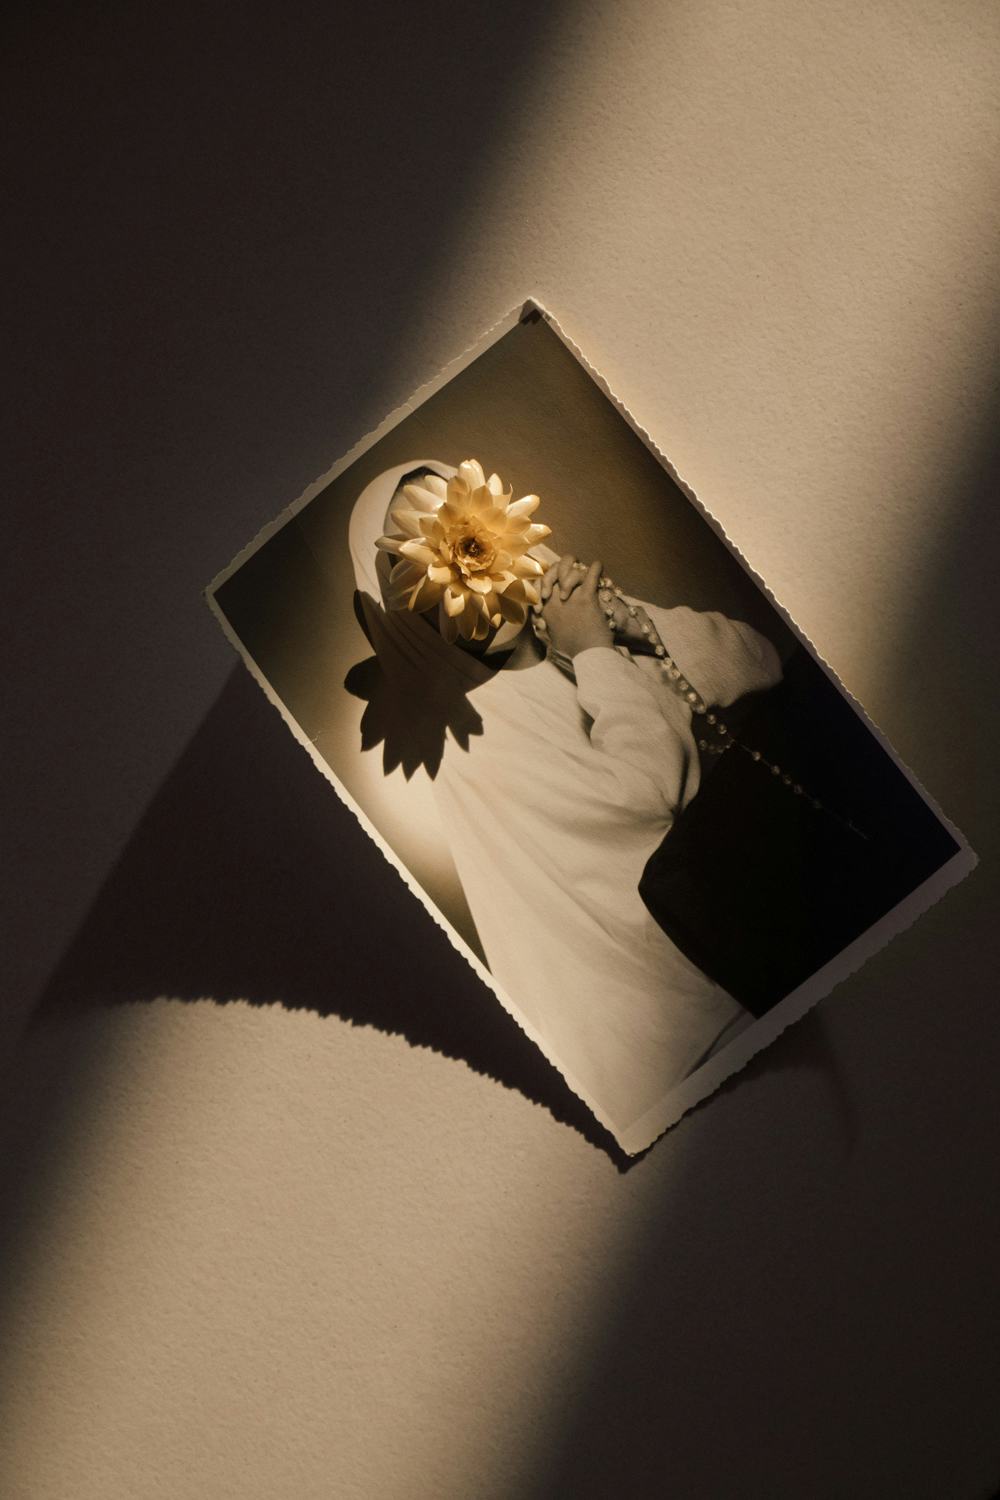 Photograph of an archival image on a backlit surface, partially covered by a flower. The image shows what appears to be a praying Christian nun.© Marisol Mendez